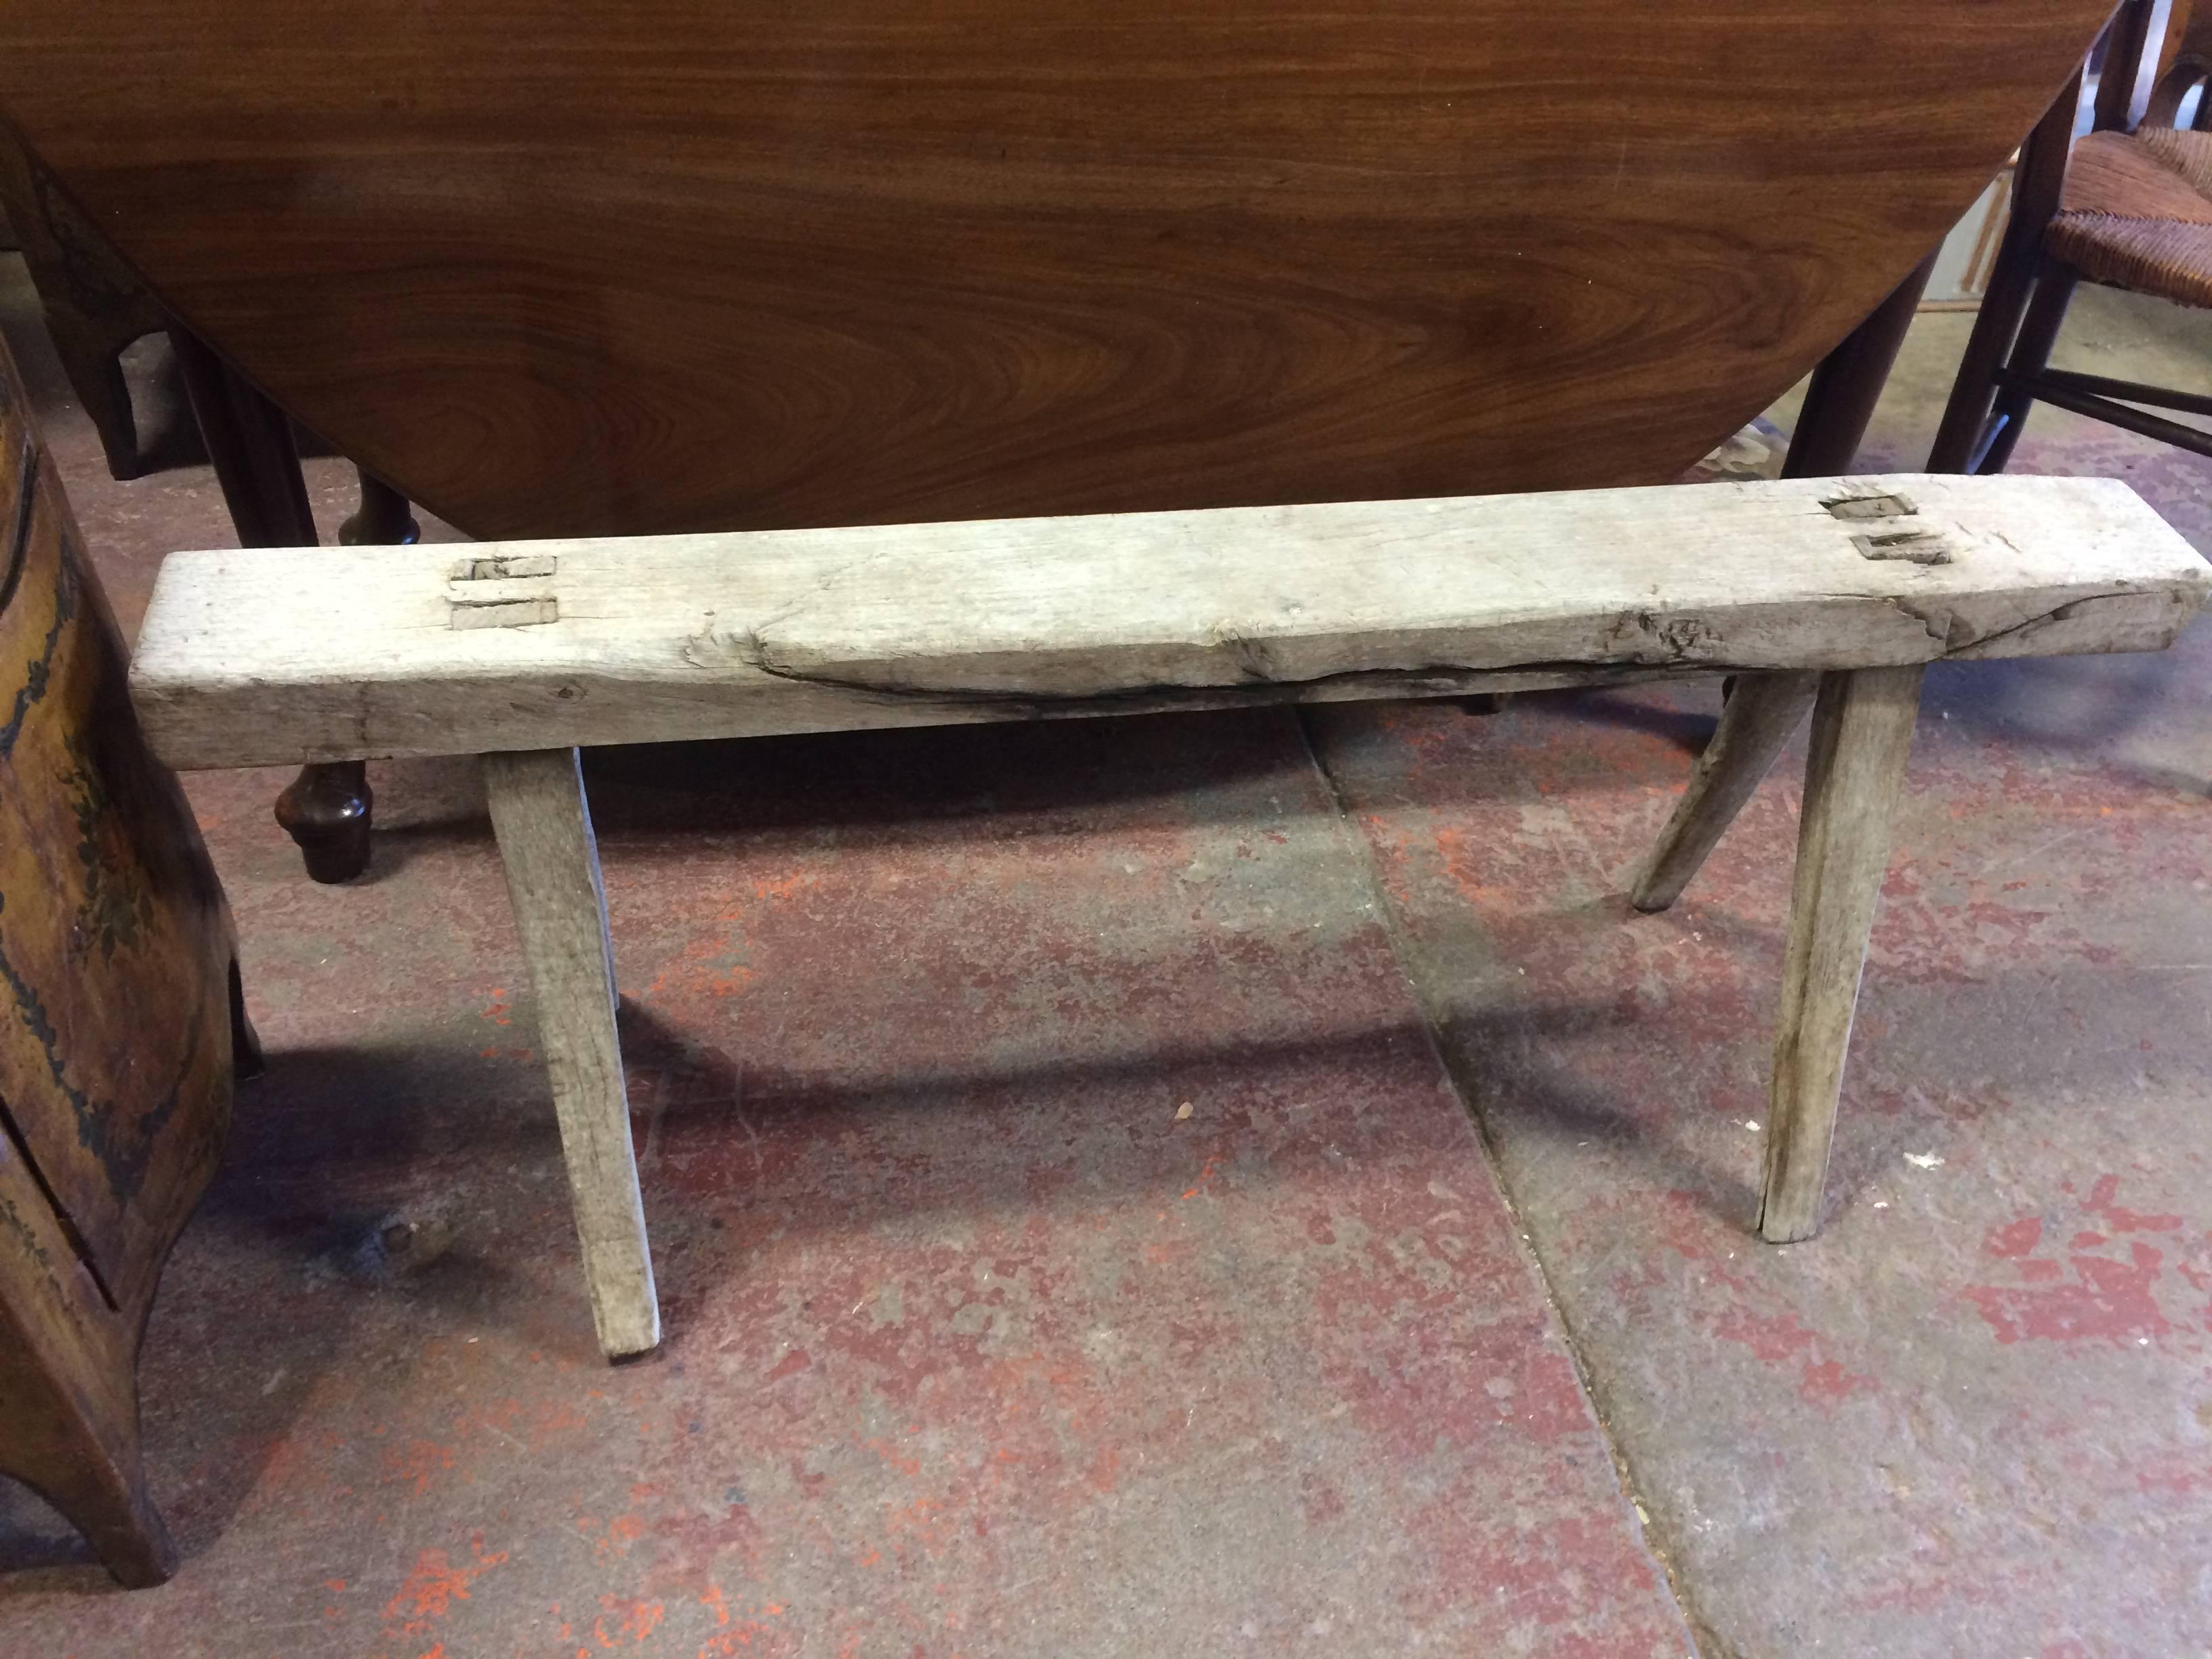 18th century French Primitive Country bench
Original patina
Oak or chestnut.